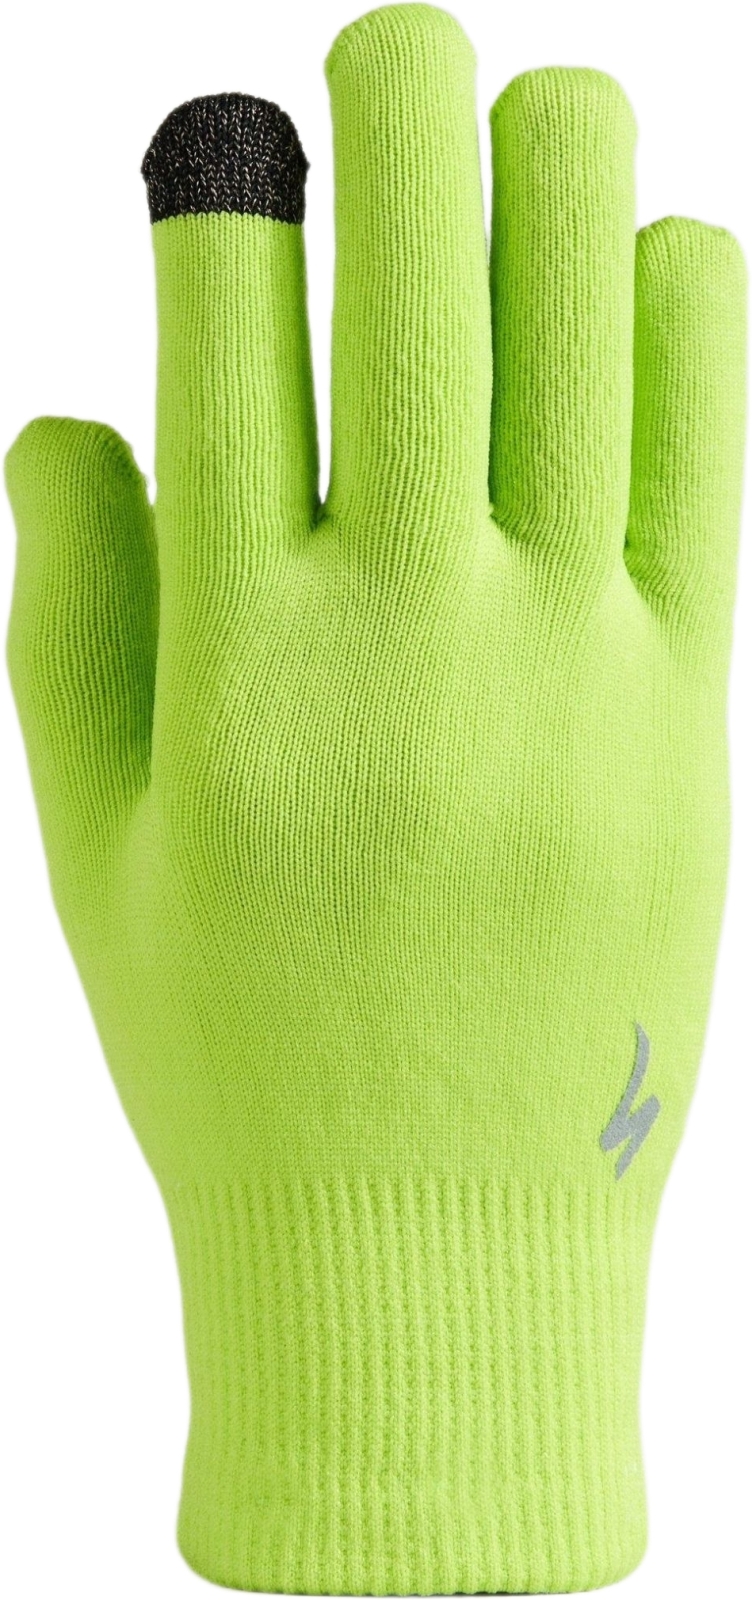 E-shop Specialized Thermal Knit Glove - hyper green L